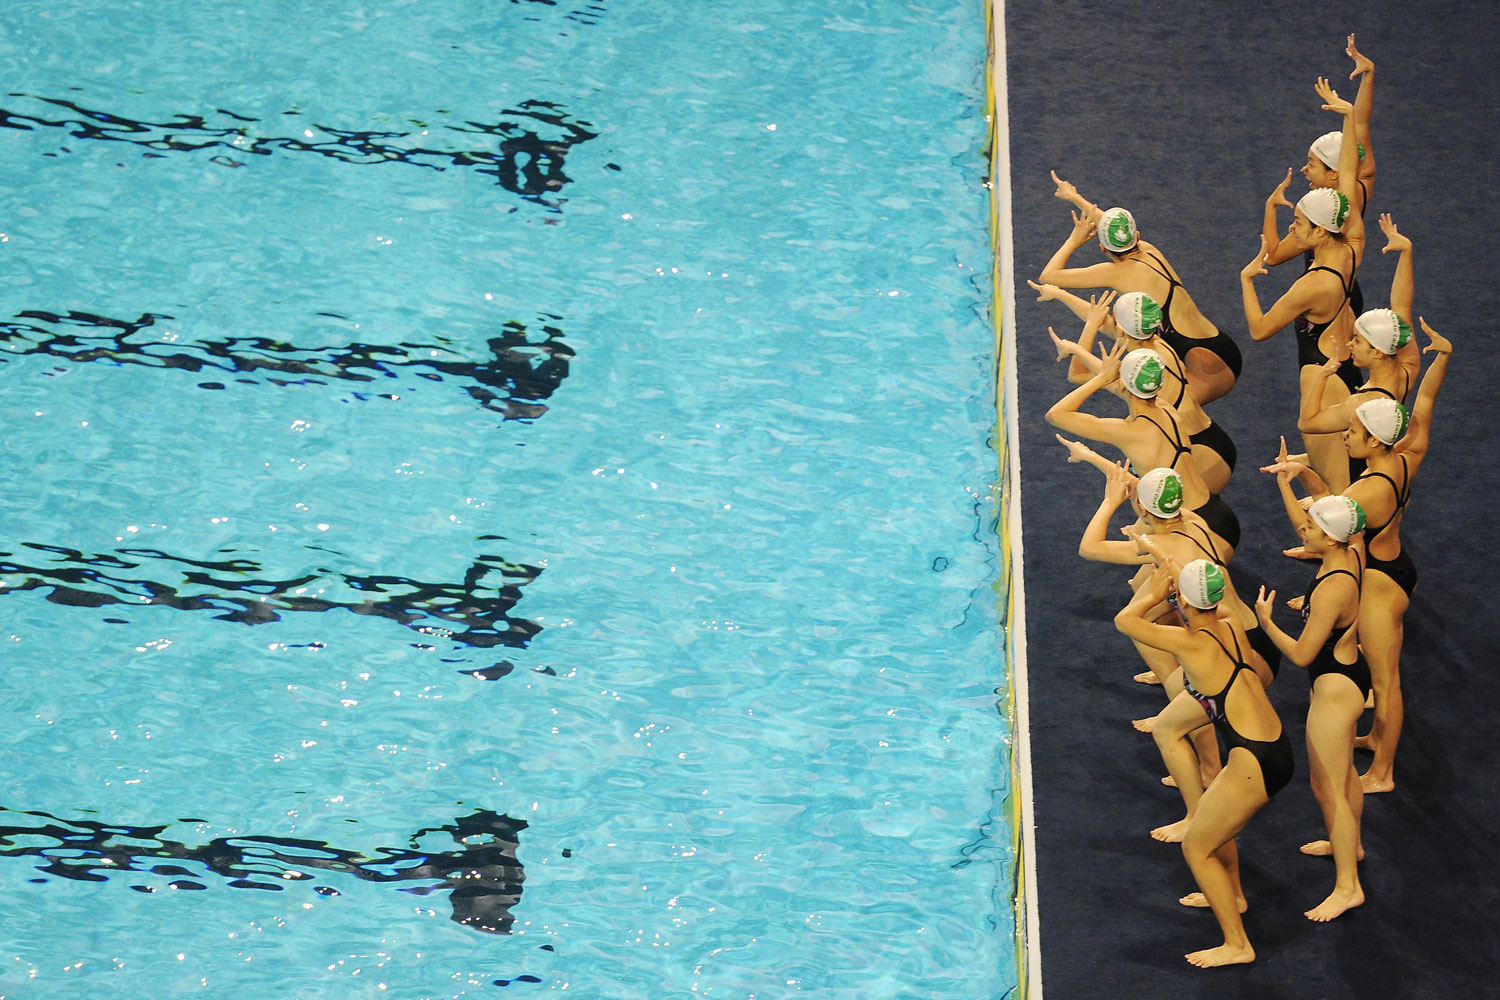 July 15, 2011. Members of the Macau synchronized swimming team practice prior to the start of the 2011 FINA World Swimming Championships in Shanghai, China.